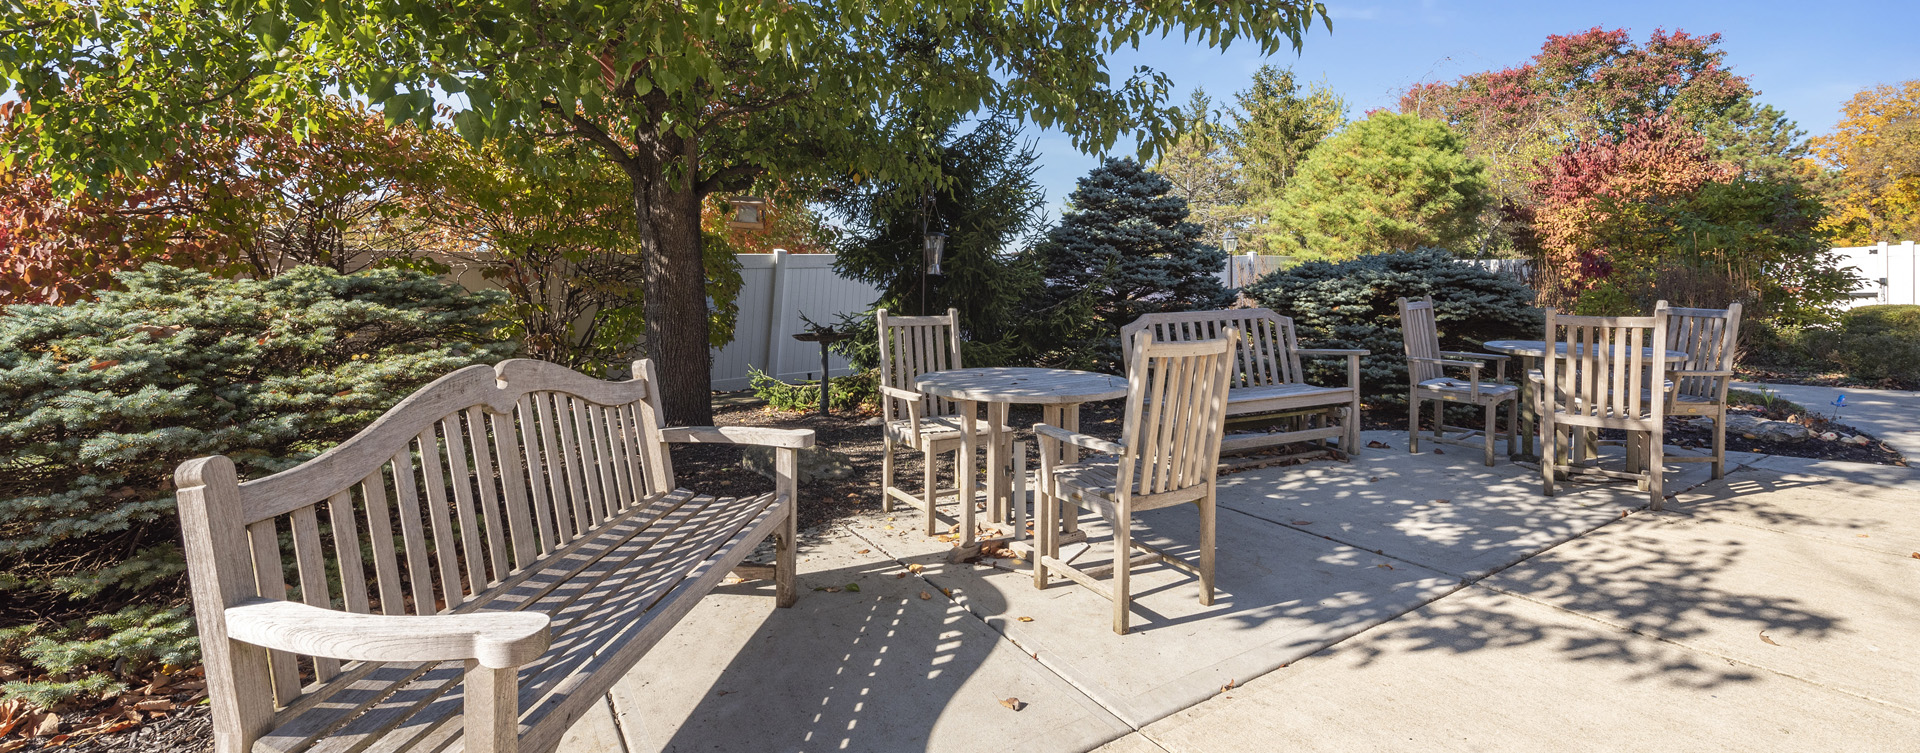 Residents with dementia can enjoy the outdoors by stepping into our secure courtyard at Bickford of Worthington